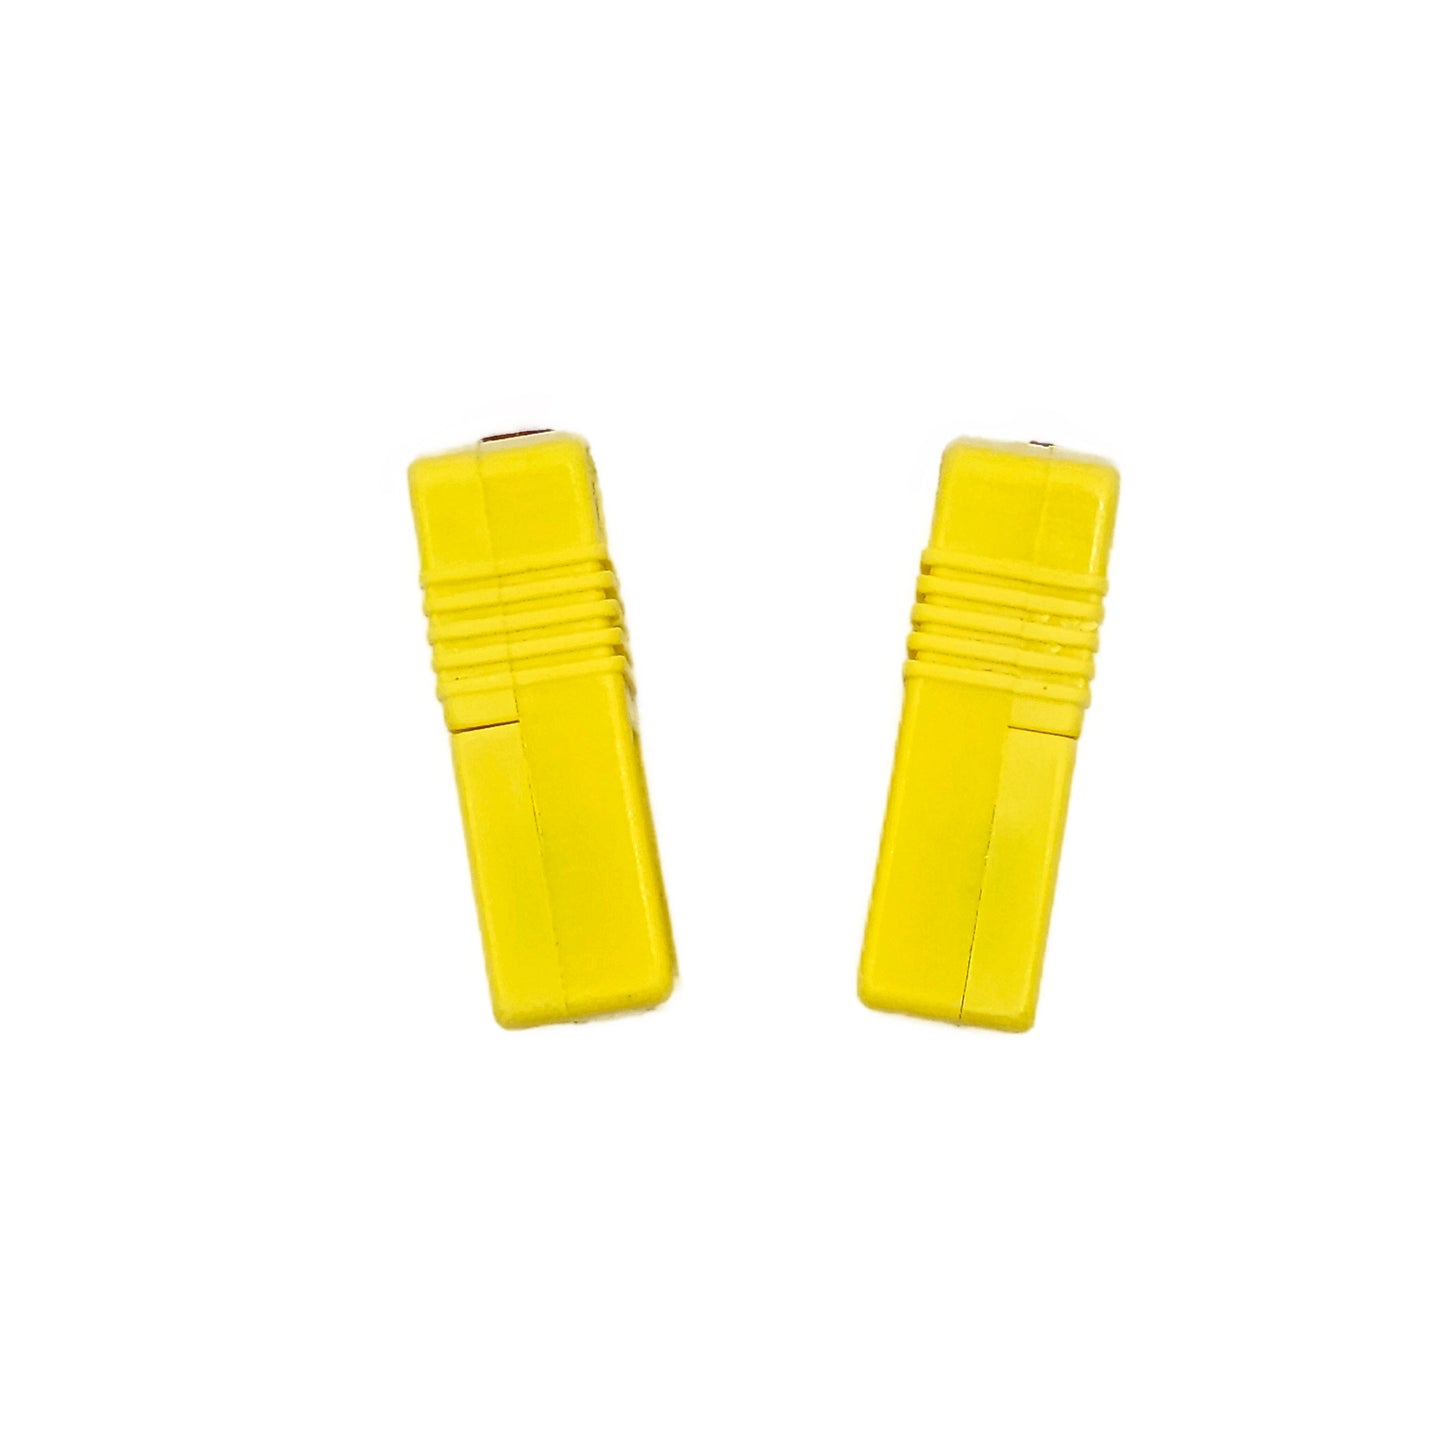 Type K Miniature Thermocouple Connectors, Omega Style - Female, 2-Pack